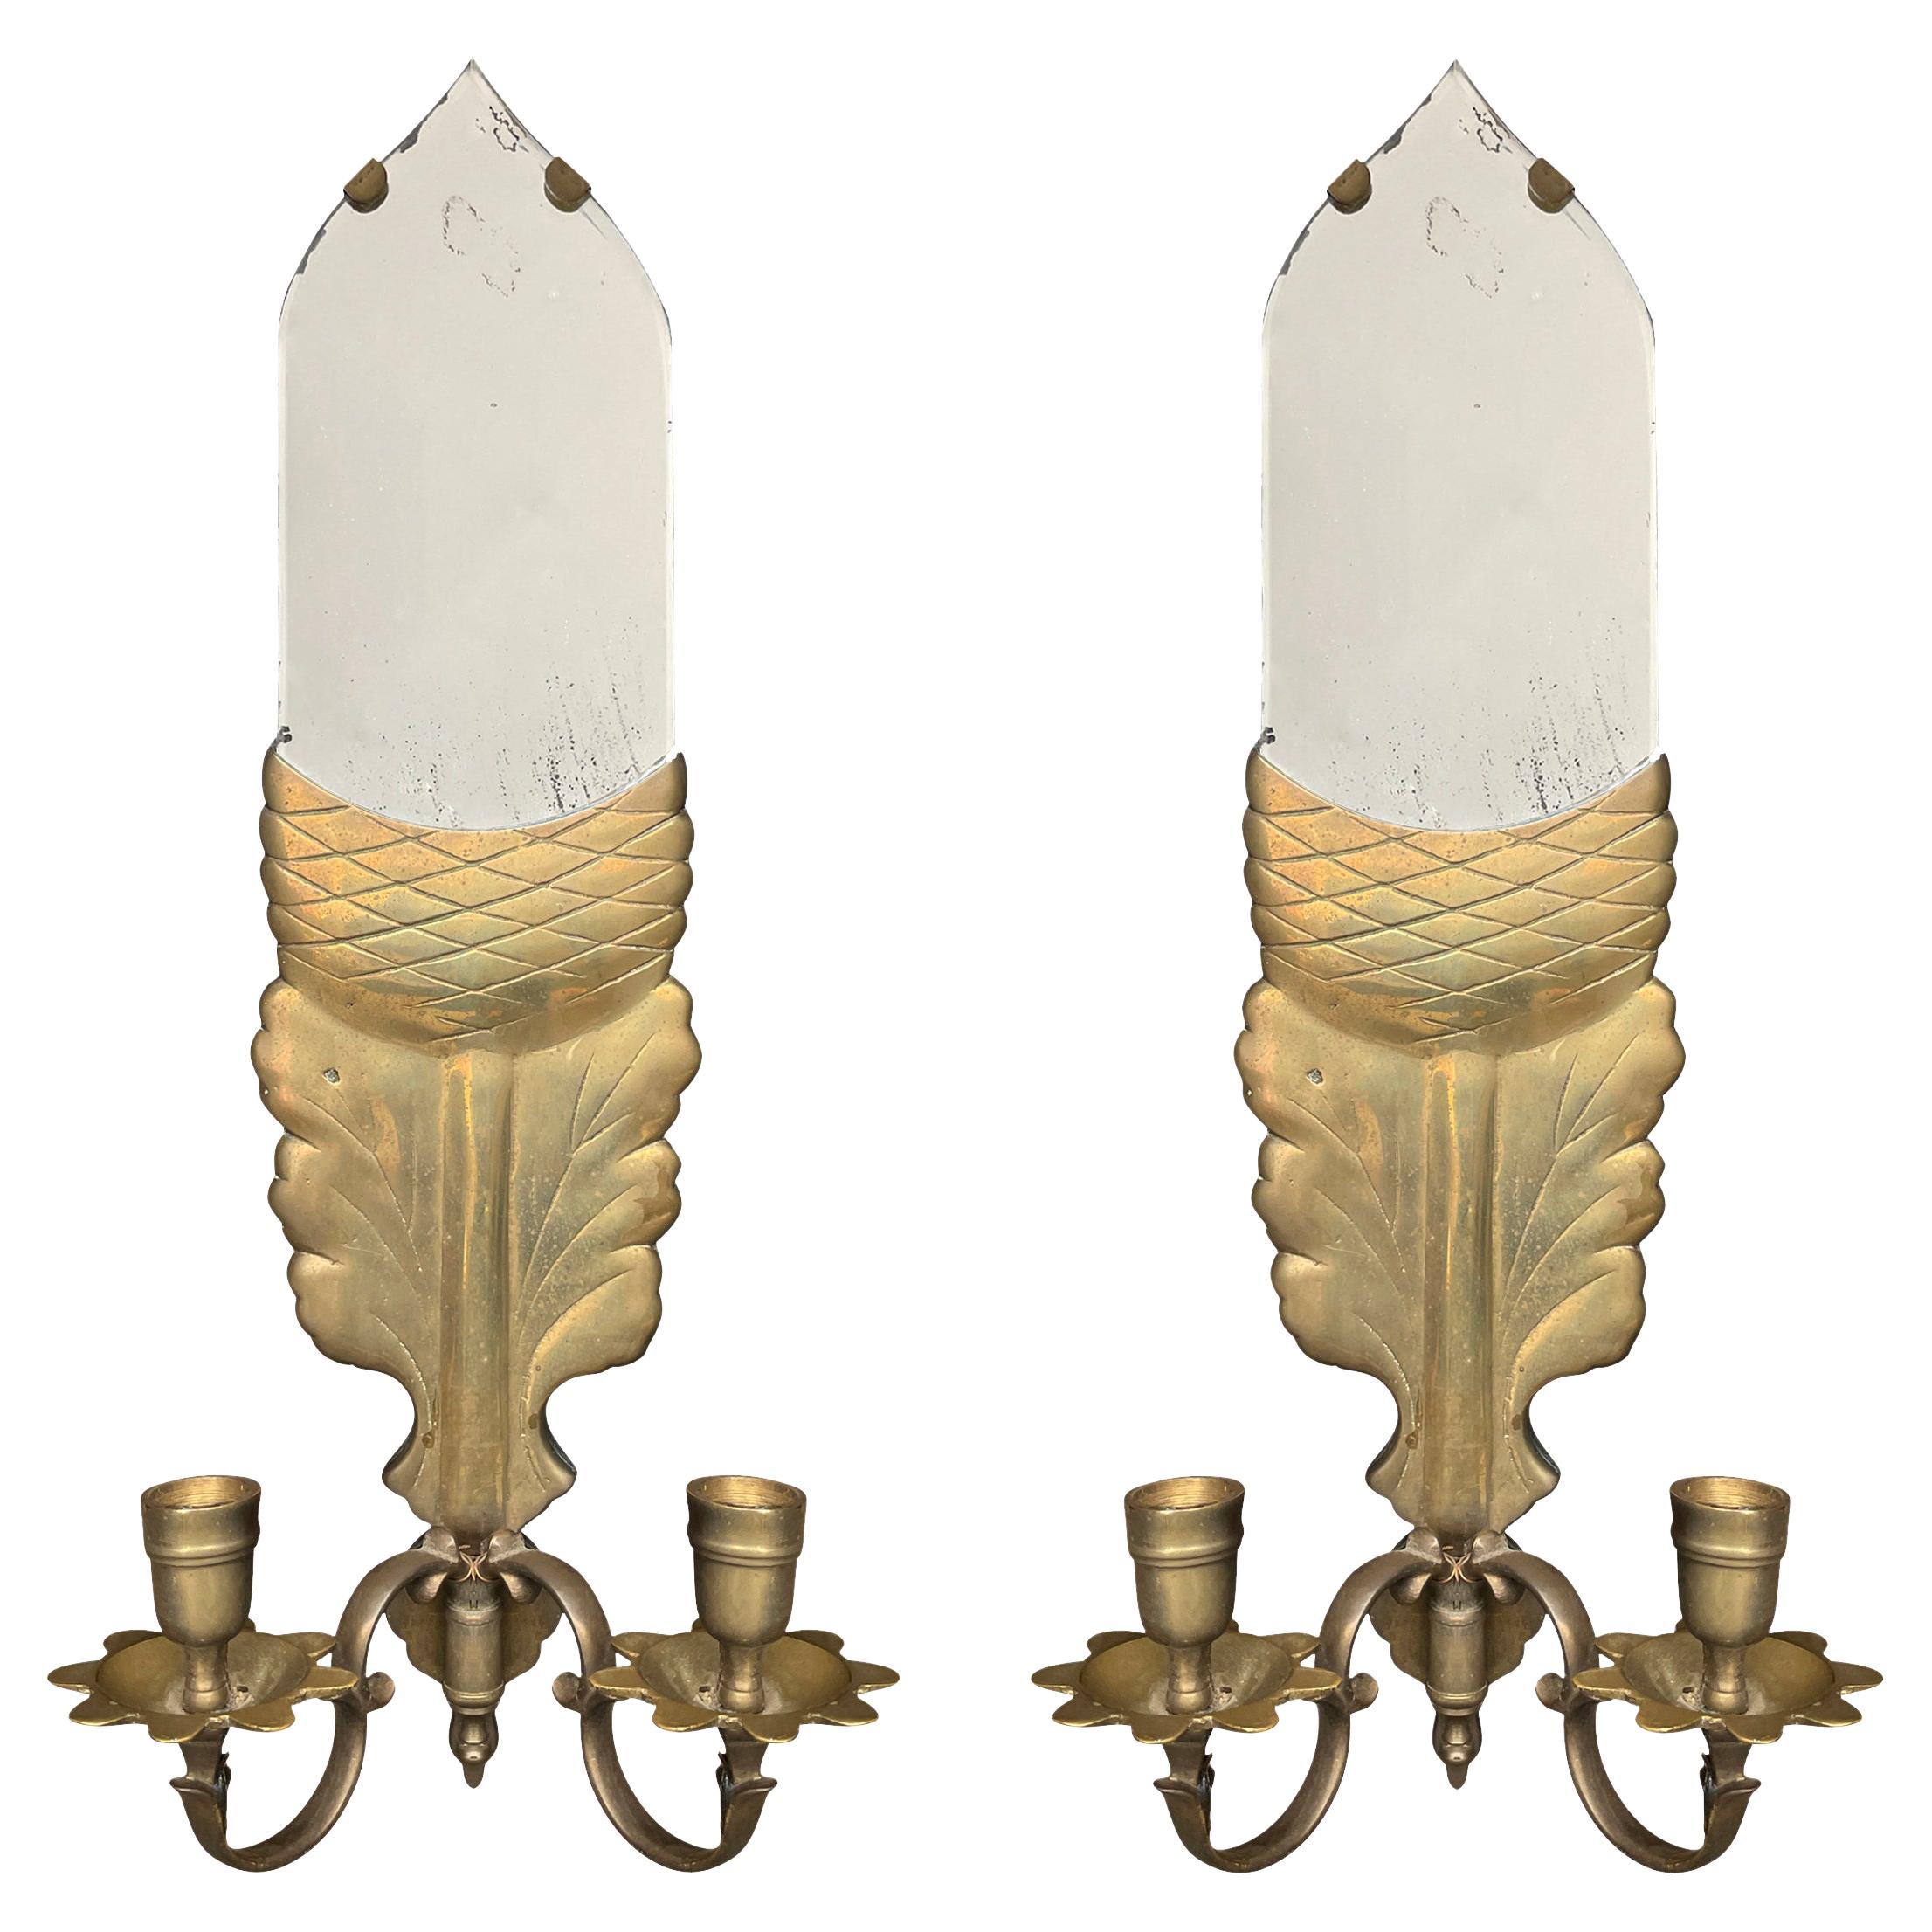 Pair of Vintage Mirrored Brass Acorn Candle Sconces